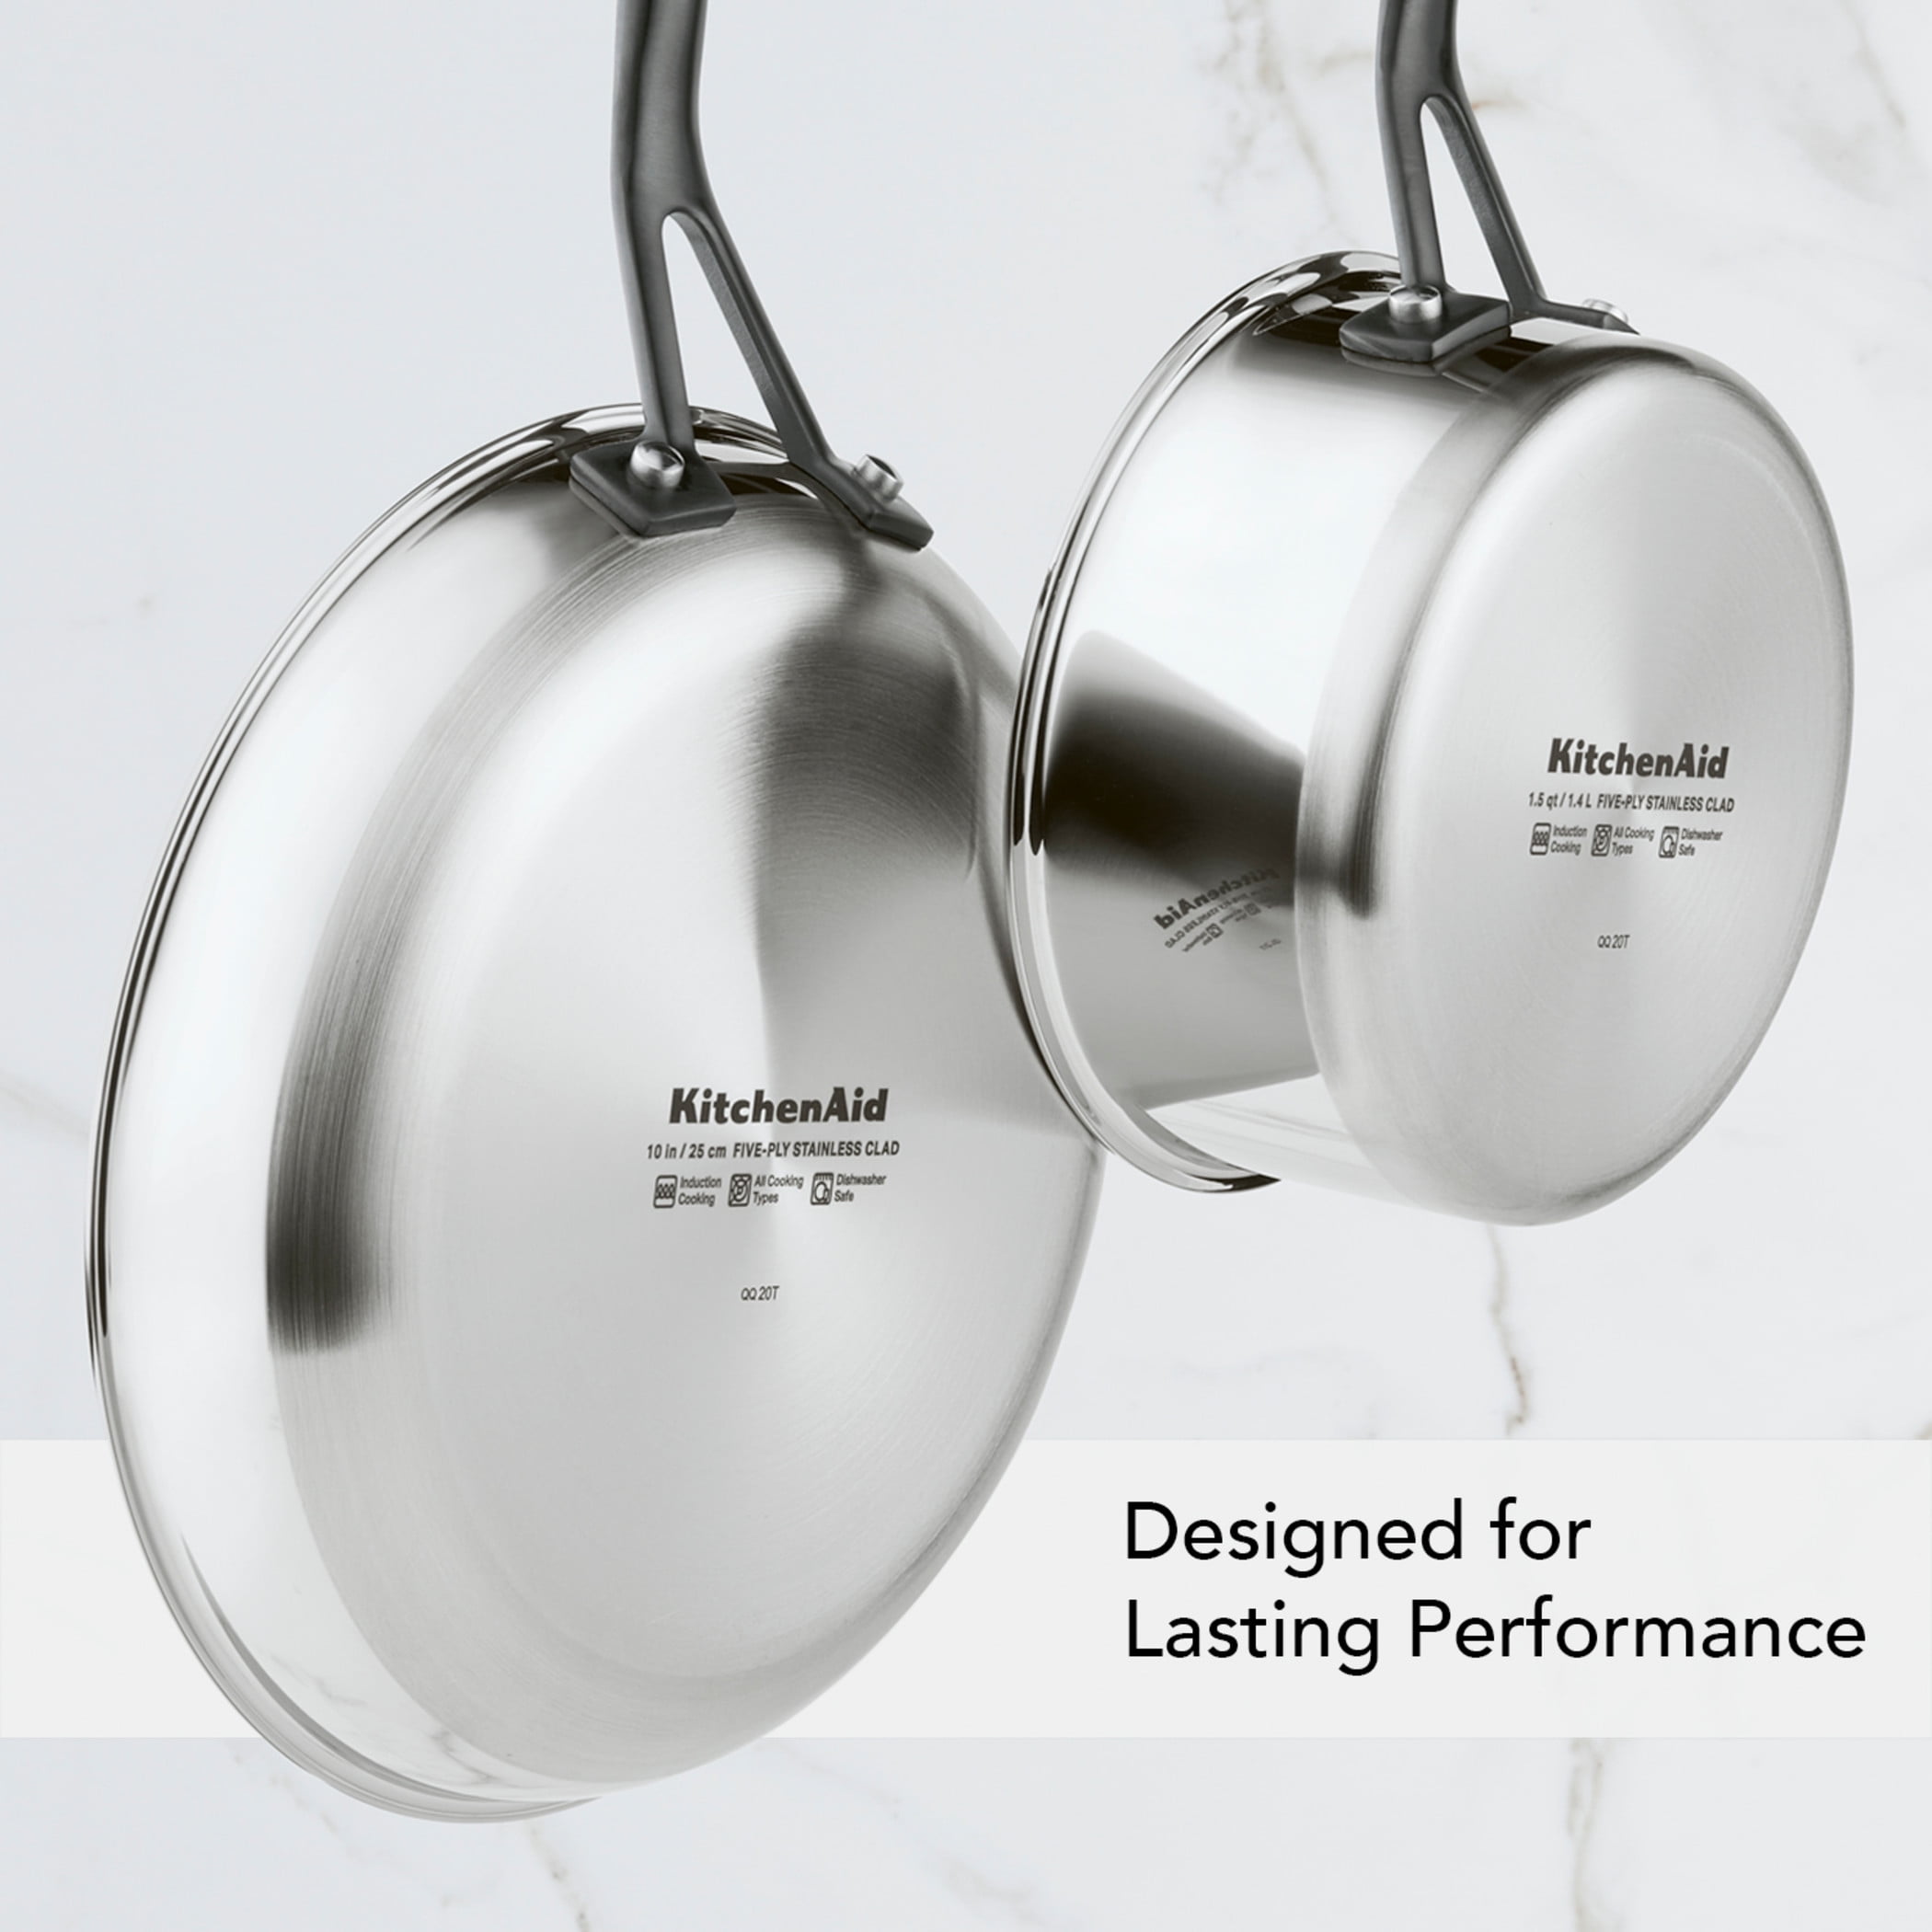  KitchenAid Nonstick Frying Pans/Skillet Set, 2 Piece, Brushed  Stainless Steel: Home & Kitchen